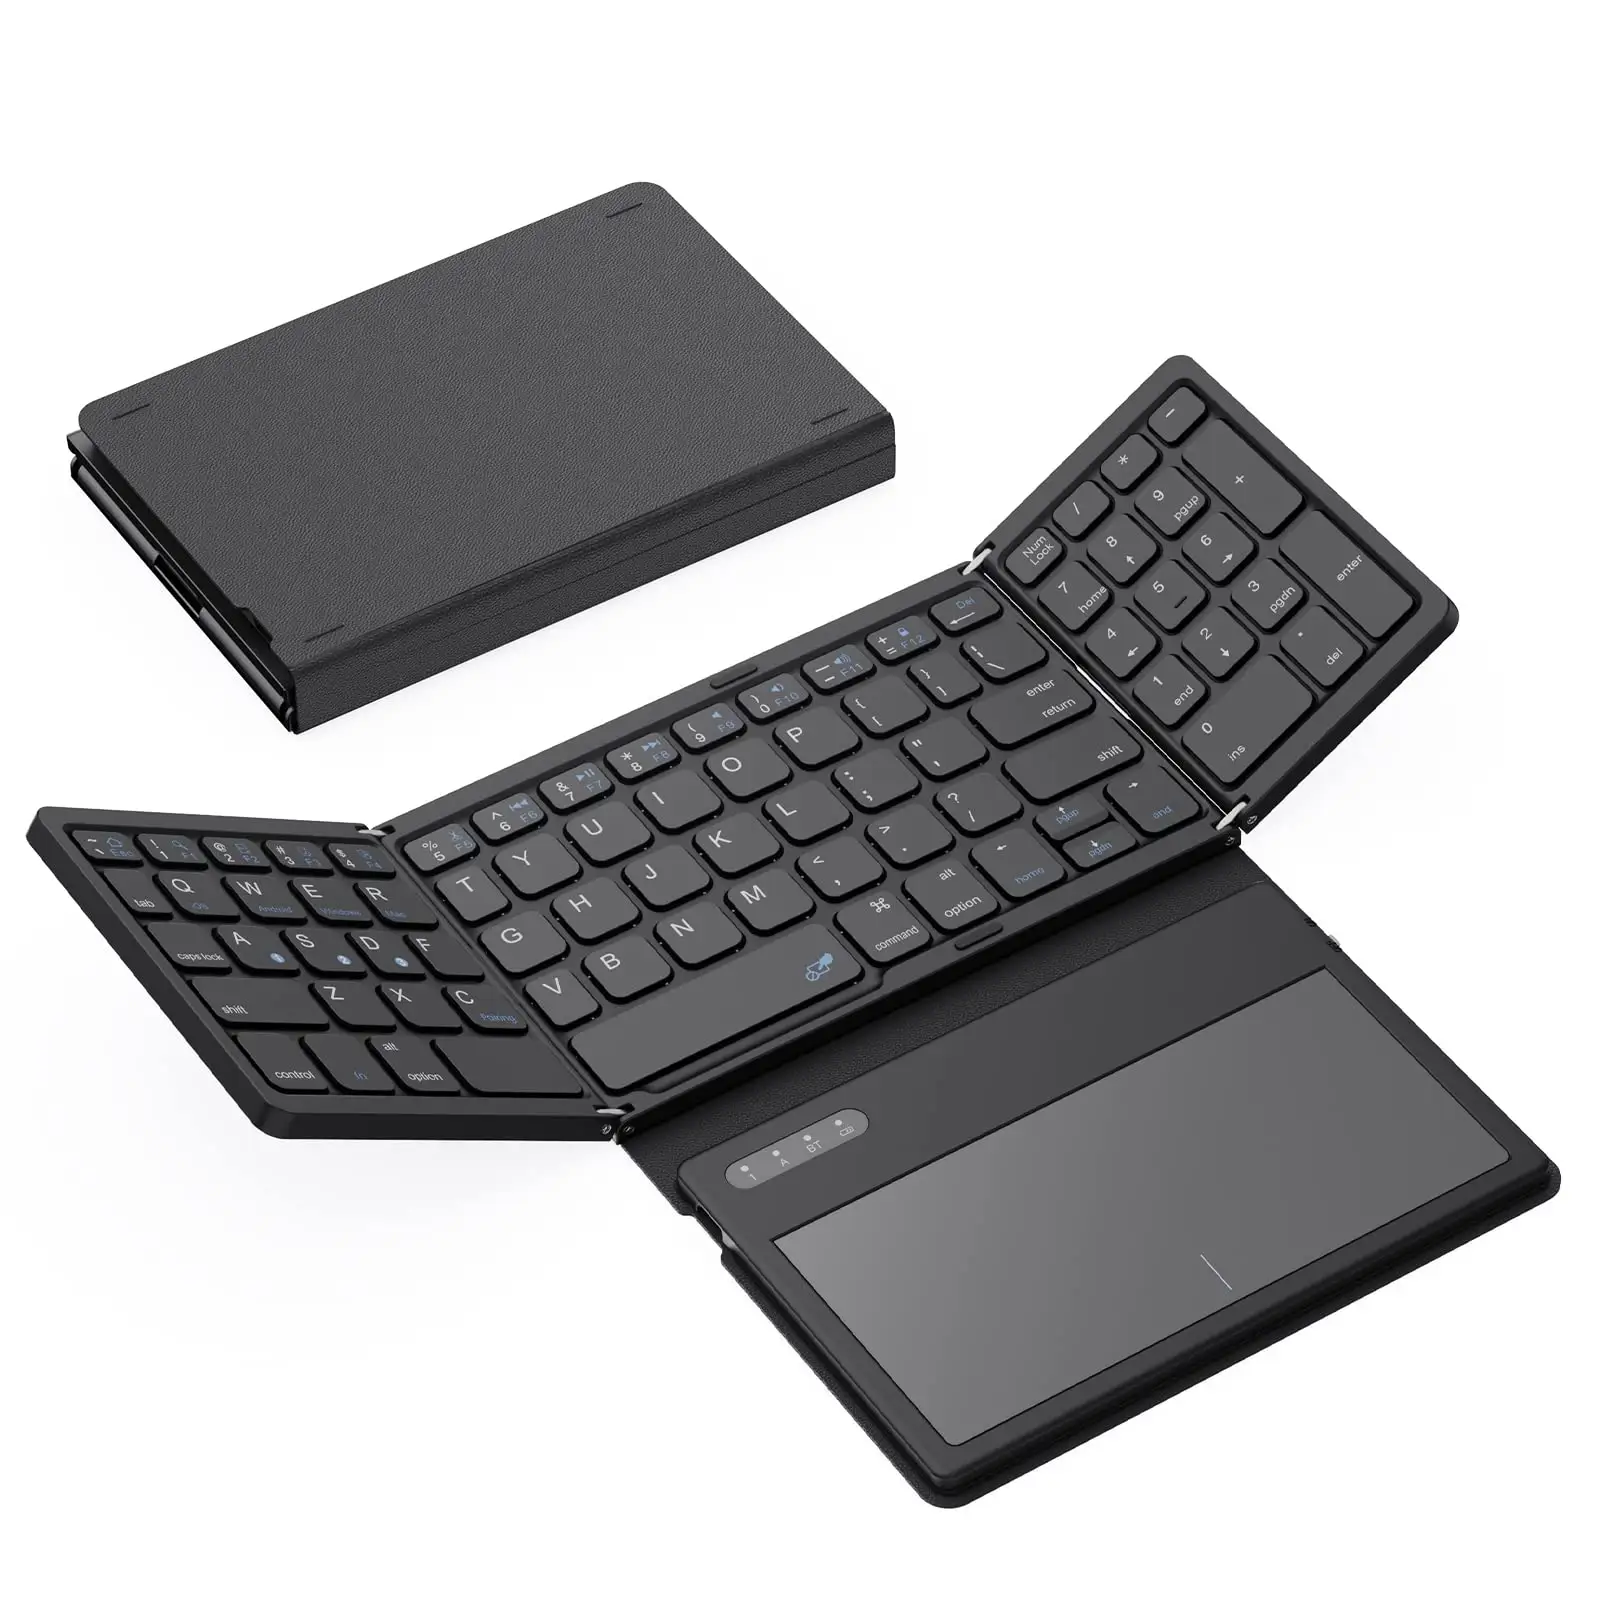 3 channels portable keyboard ultra thin foldable infinite keyboard and mouse foldable flexible keyboard with touchpad for ipad